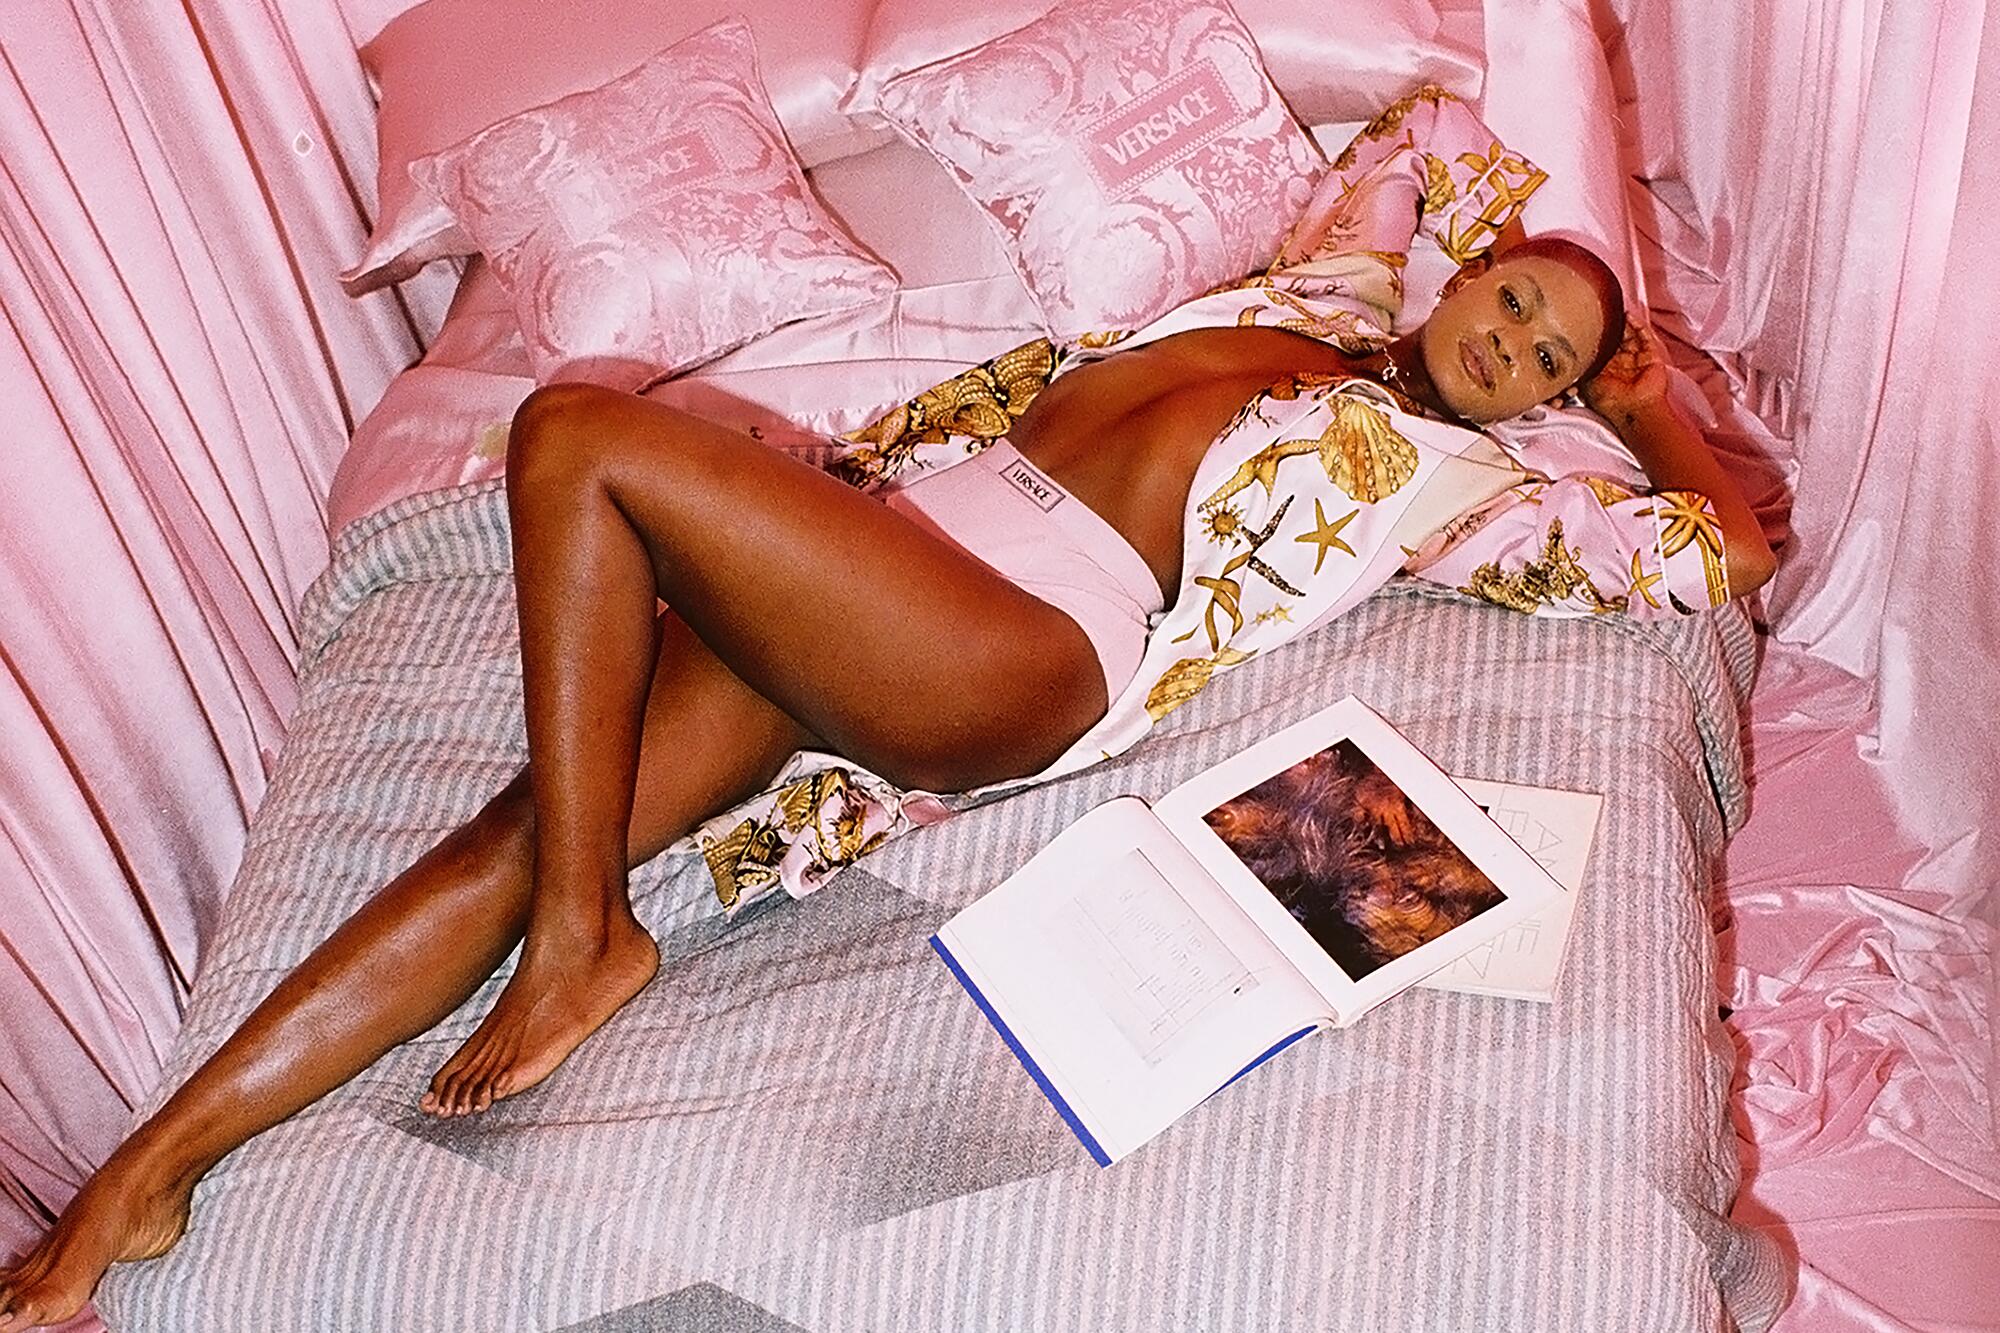 Pamela wears Versace briefs and robe, Justine Clenquet earrings and necklace, face mask. Versace <QL>bedding